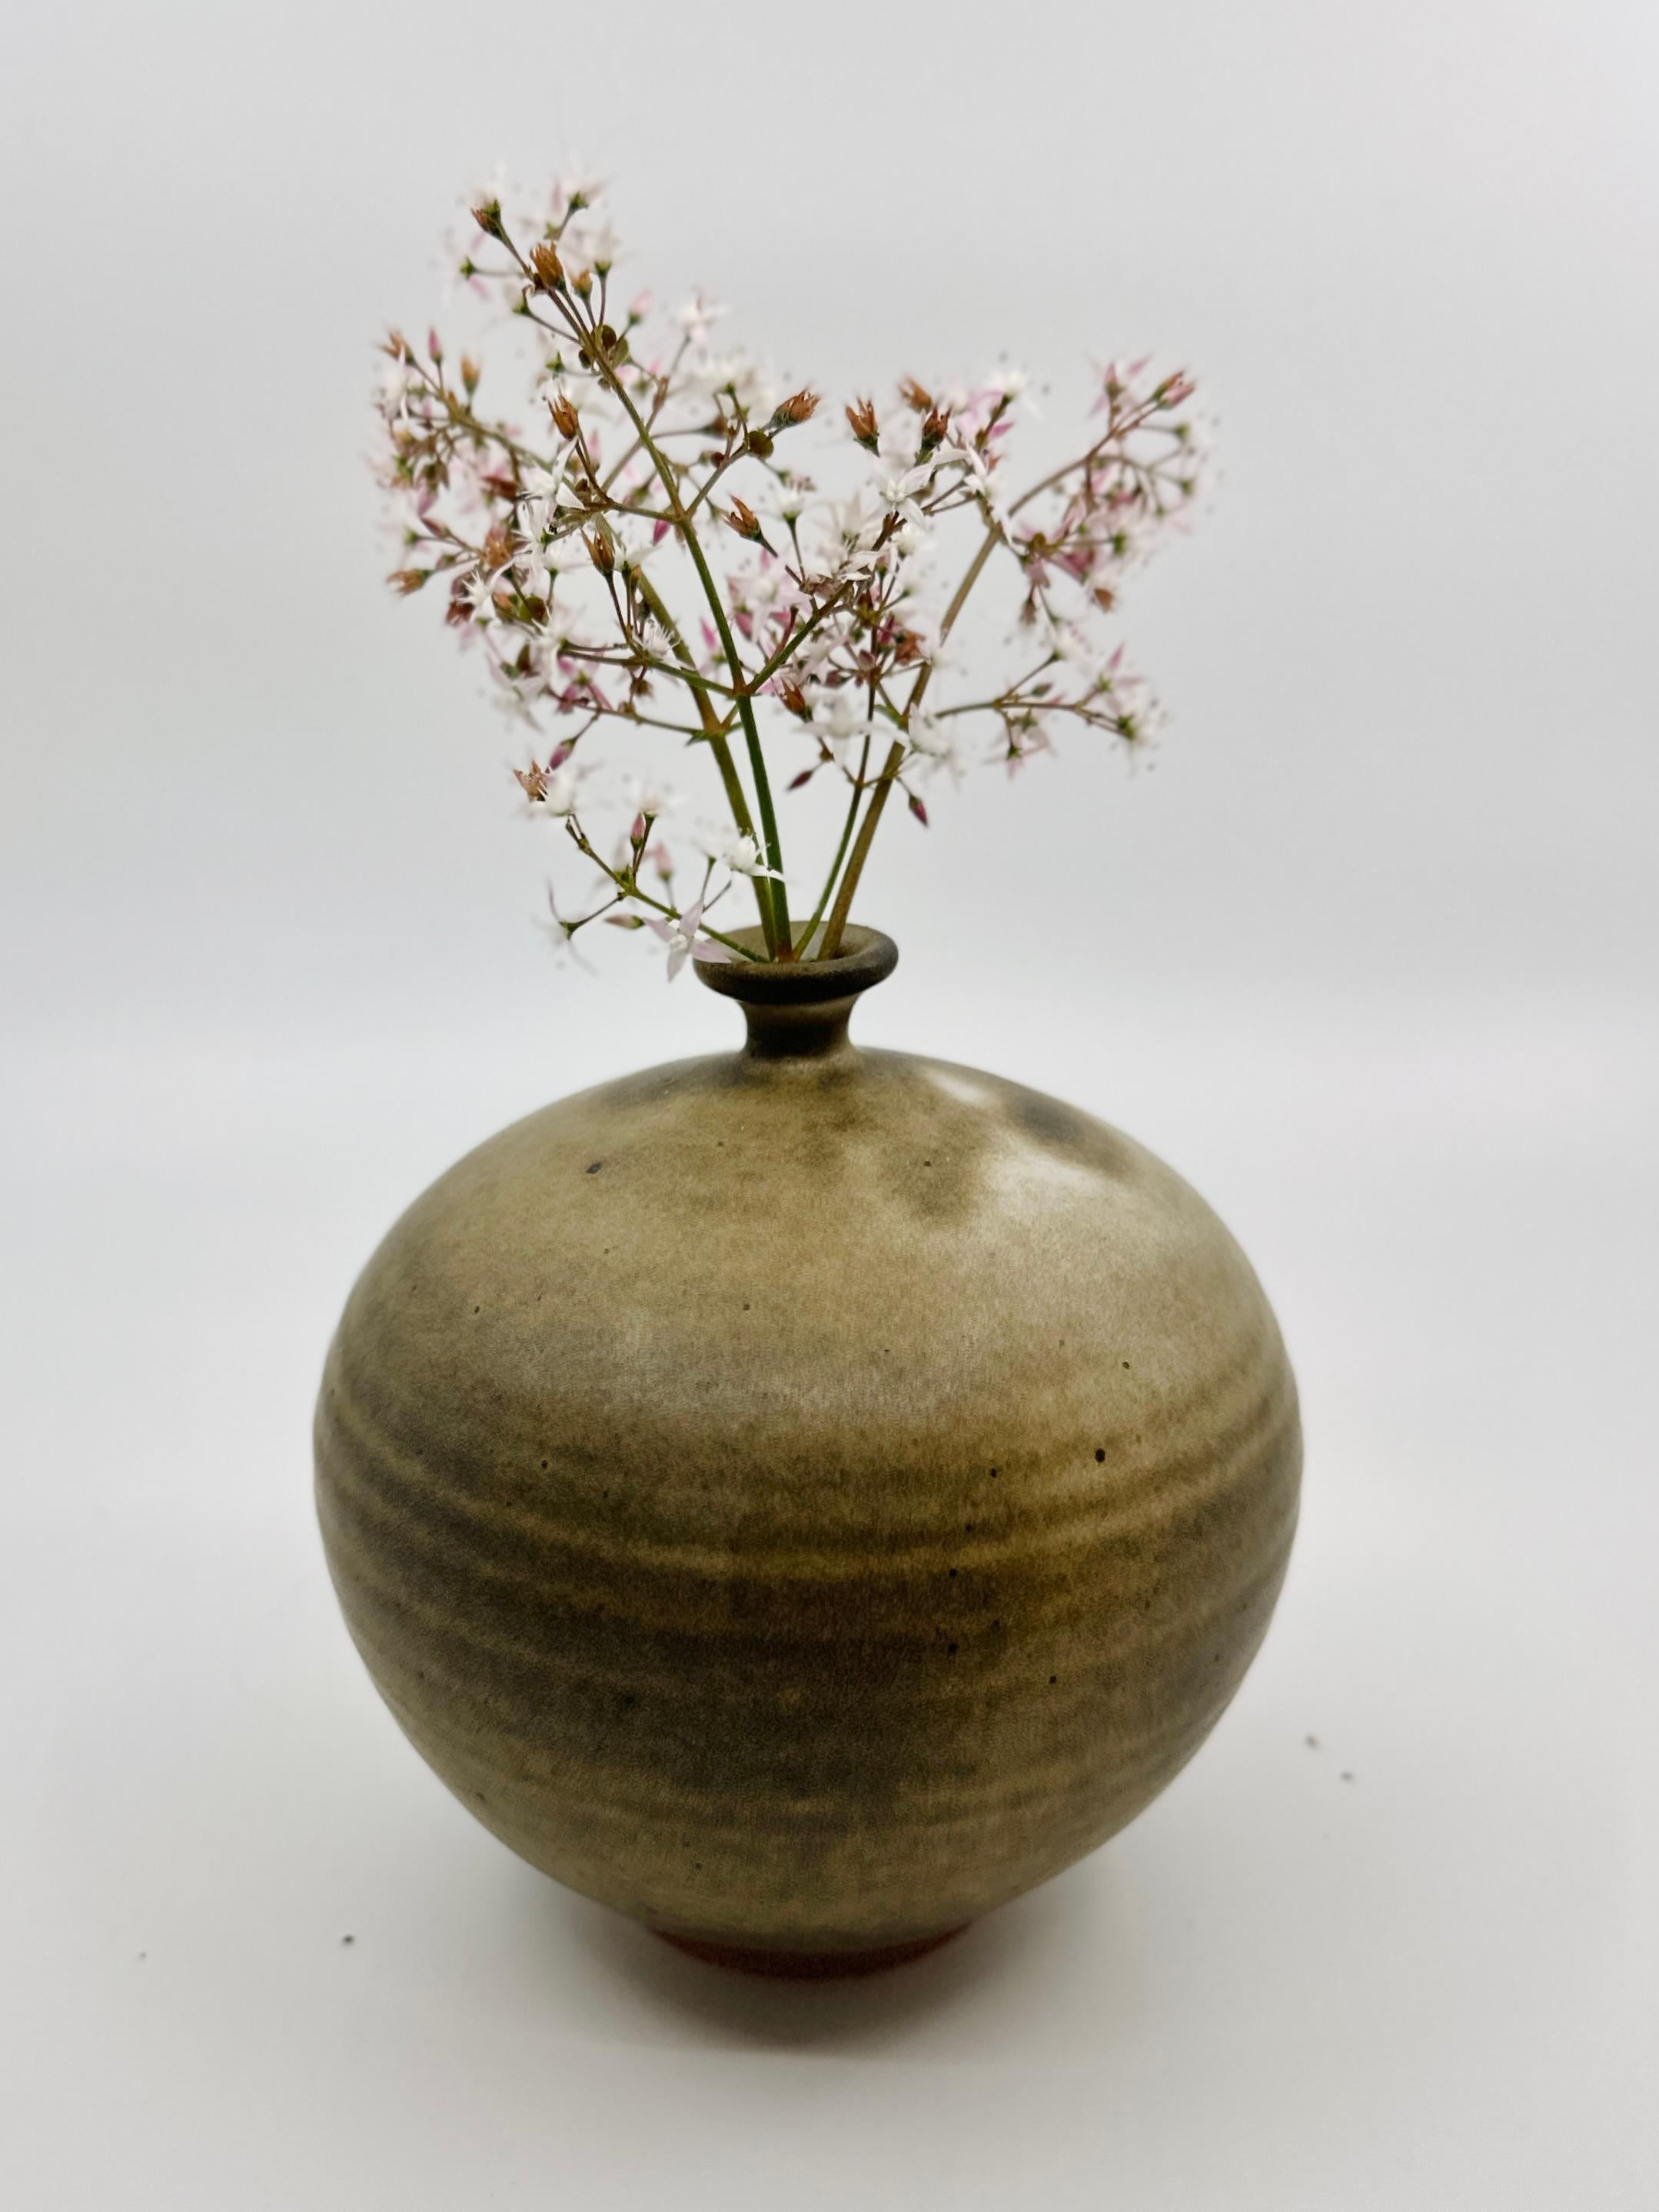 Wheel-thrown little neck vessel in beautiful gray, brown and cream colors. Made from light stoneware, this piece serves as a testament to the timeless beauty of heirloom pottery, bringing an organic serenity to your dearest spaces.

Dimensions: 5.5”